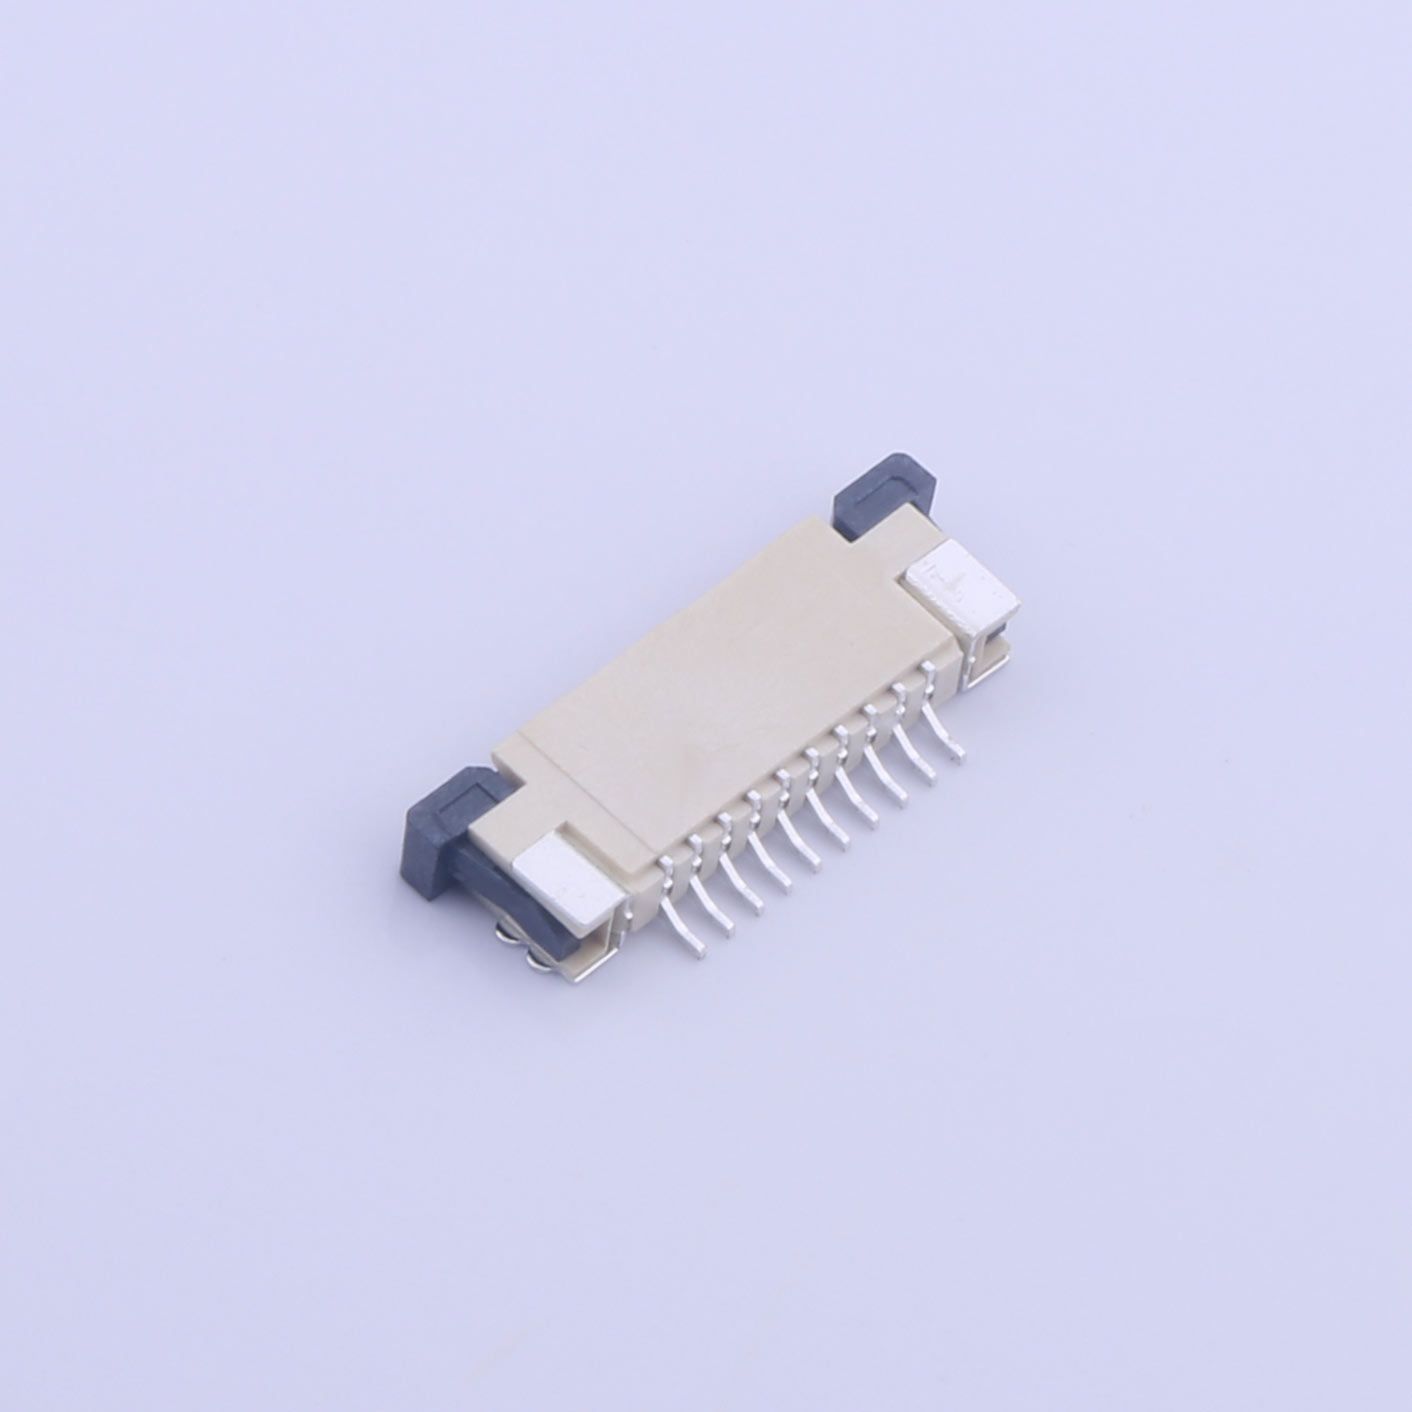 Kinghelm FFC/FPC Connector 14p Pitch 1mm - KH-CL1.0-H2.5-14pin